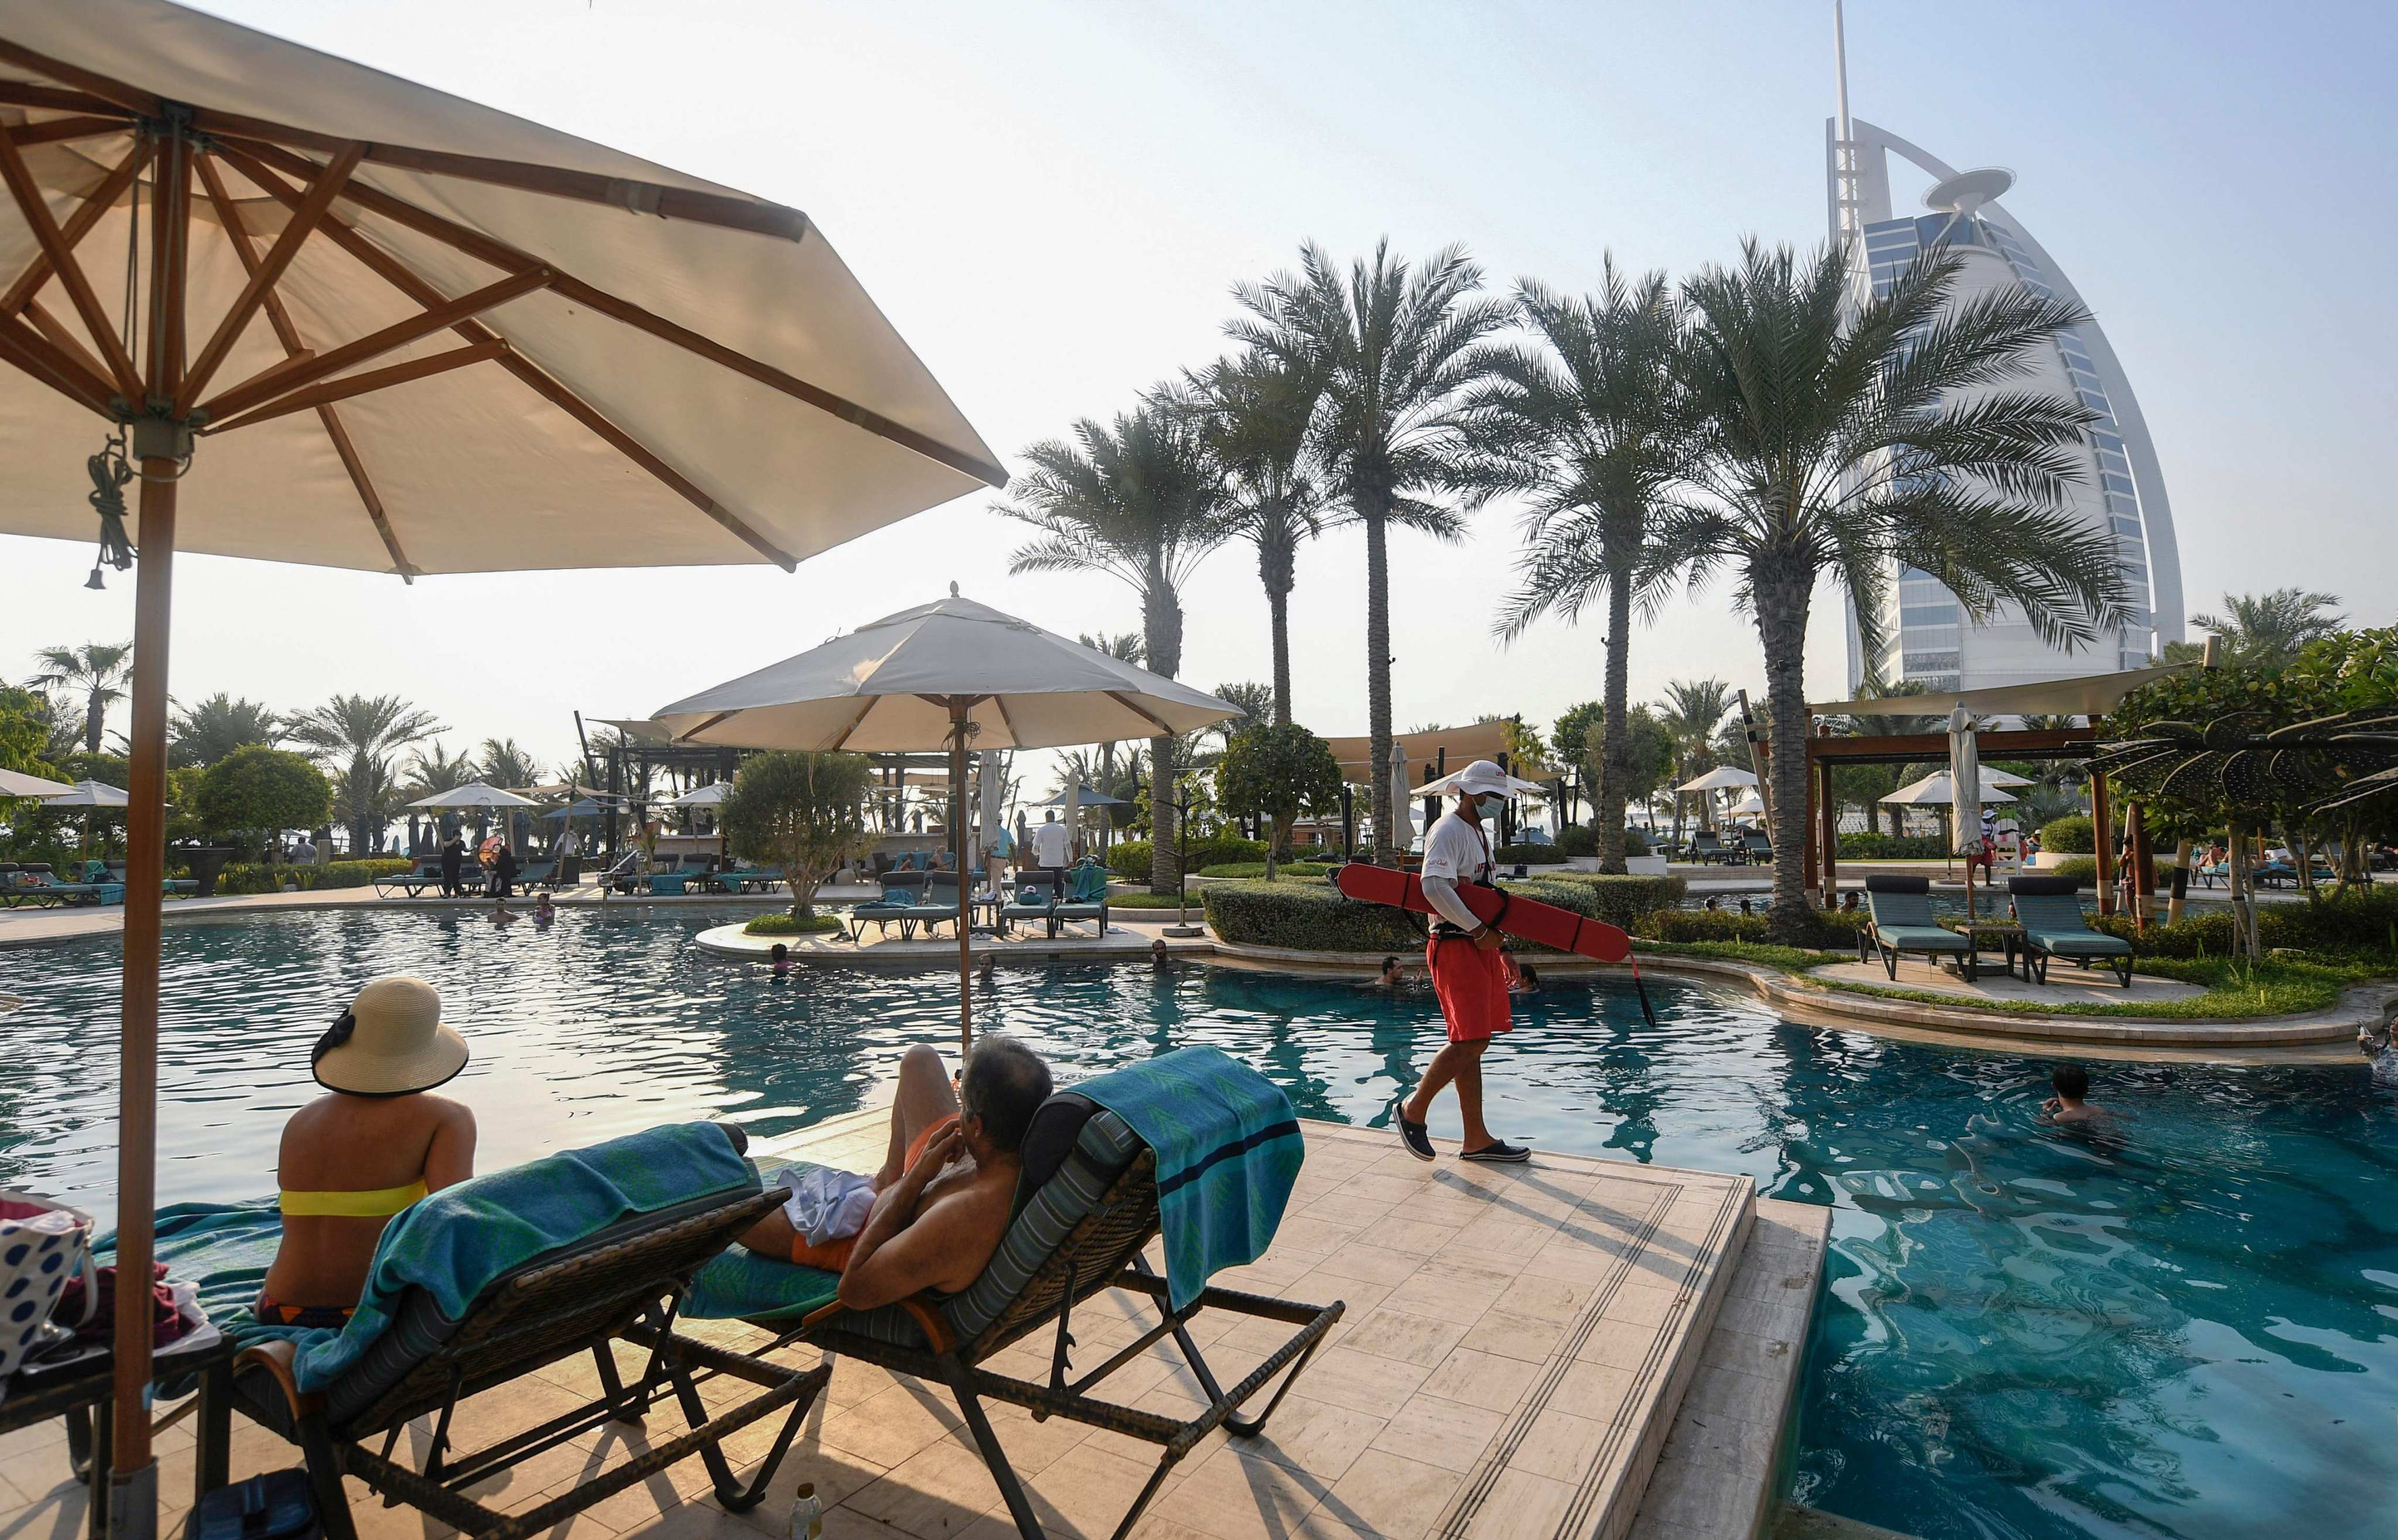 Tourists sunbathe by the pool of the Al Naseem hotel in the Gulf emirate of Dubai in the United Arab Emirates, on July 7, 2020, with a view of the Burj al-Arab hotel in the background. Photo: AFP